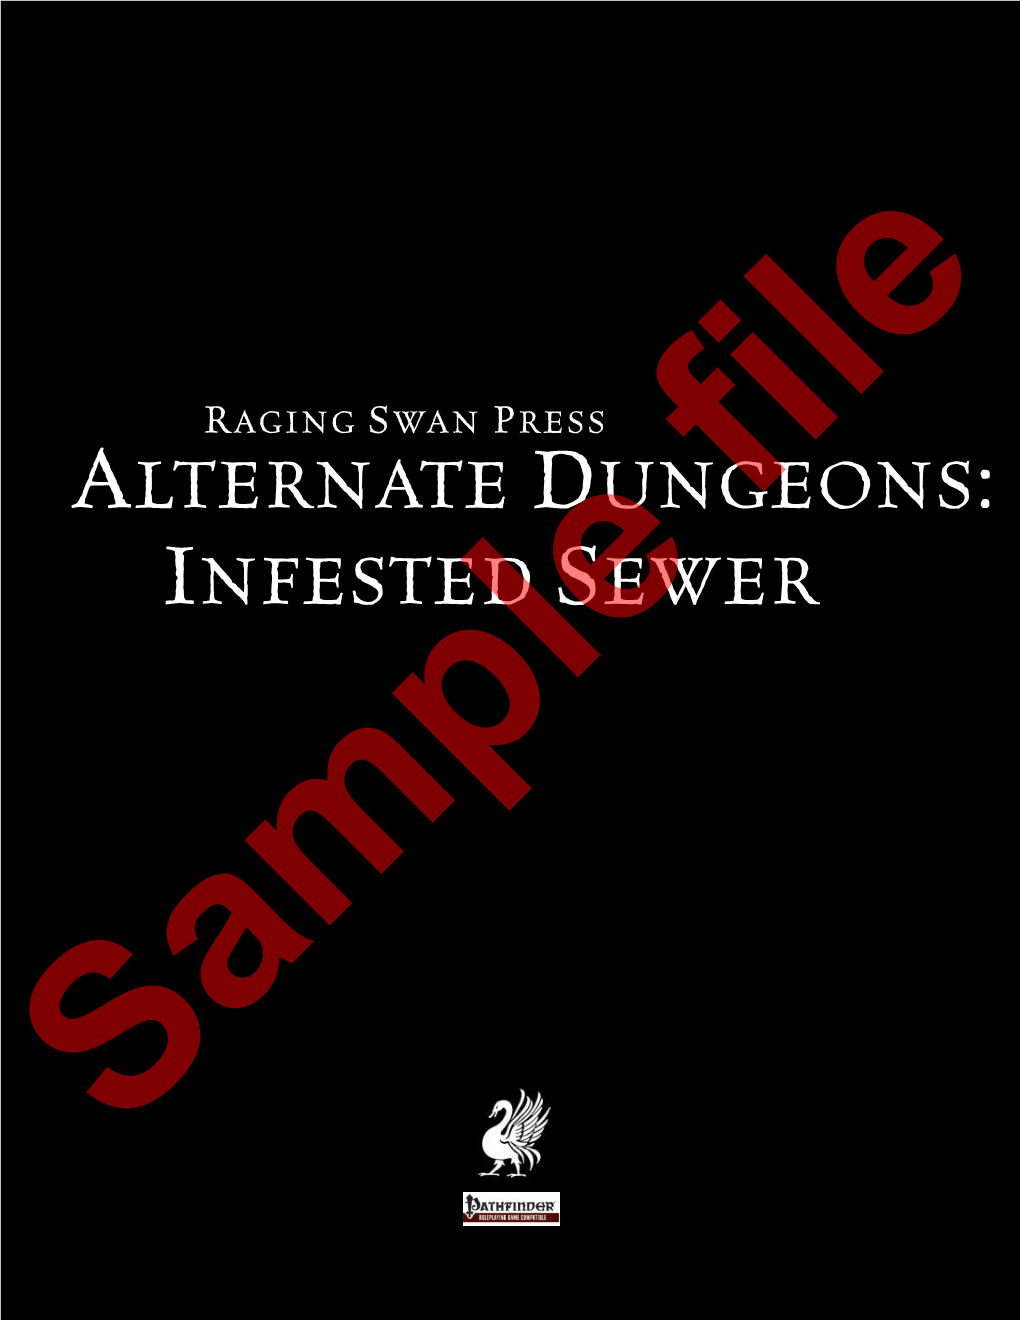 Alternate Dungeons: Infested Sewer